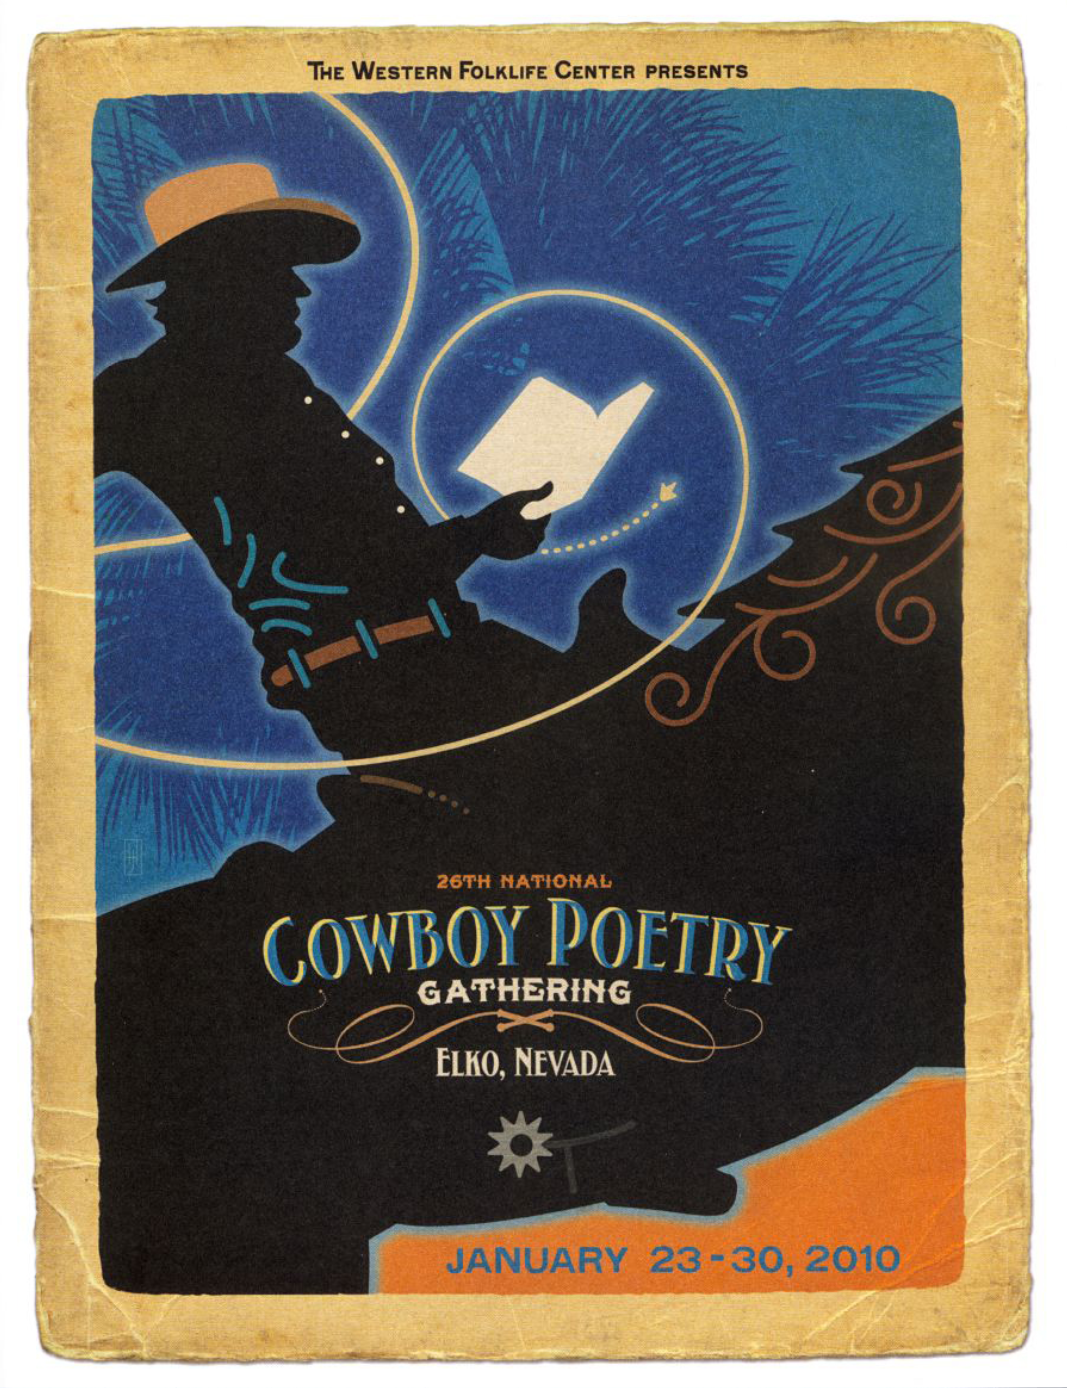 Program cover from the 26th National Cowboy Poetry Gathering in 2010. Artwork by Jim Harrison.